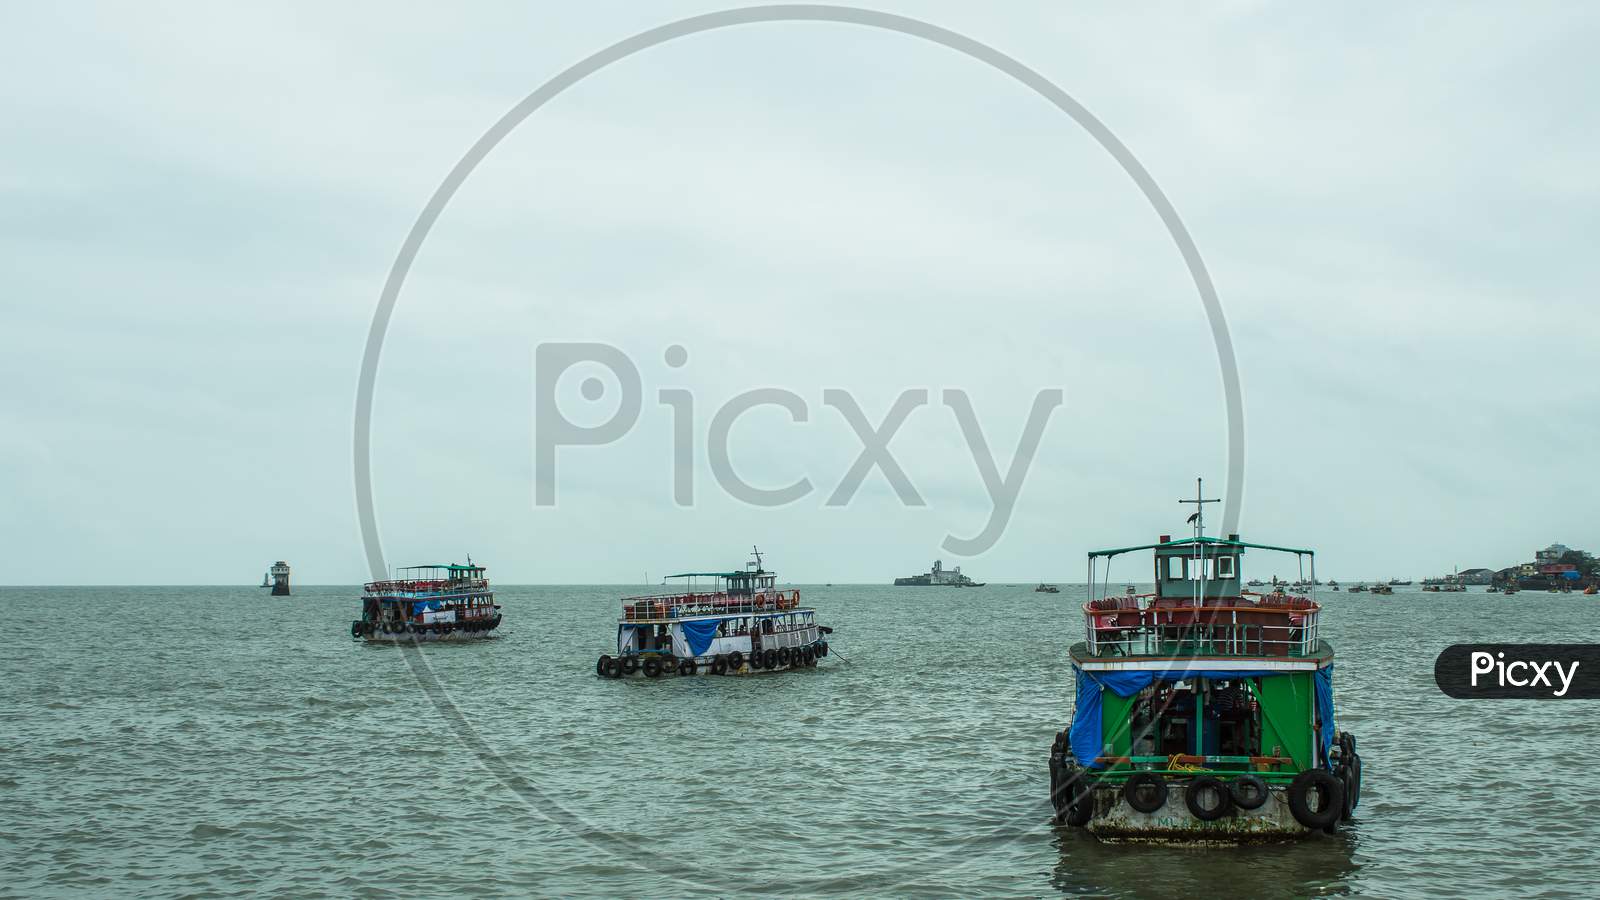 boats in the sea